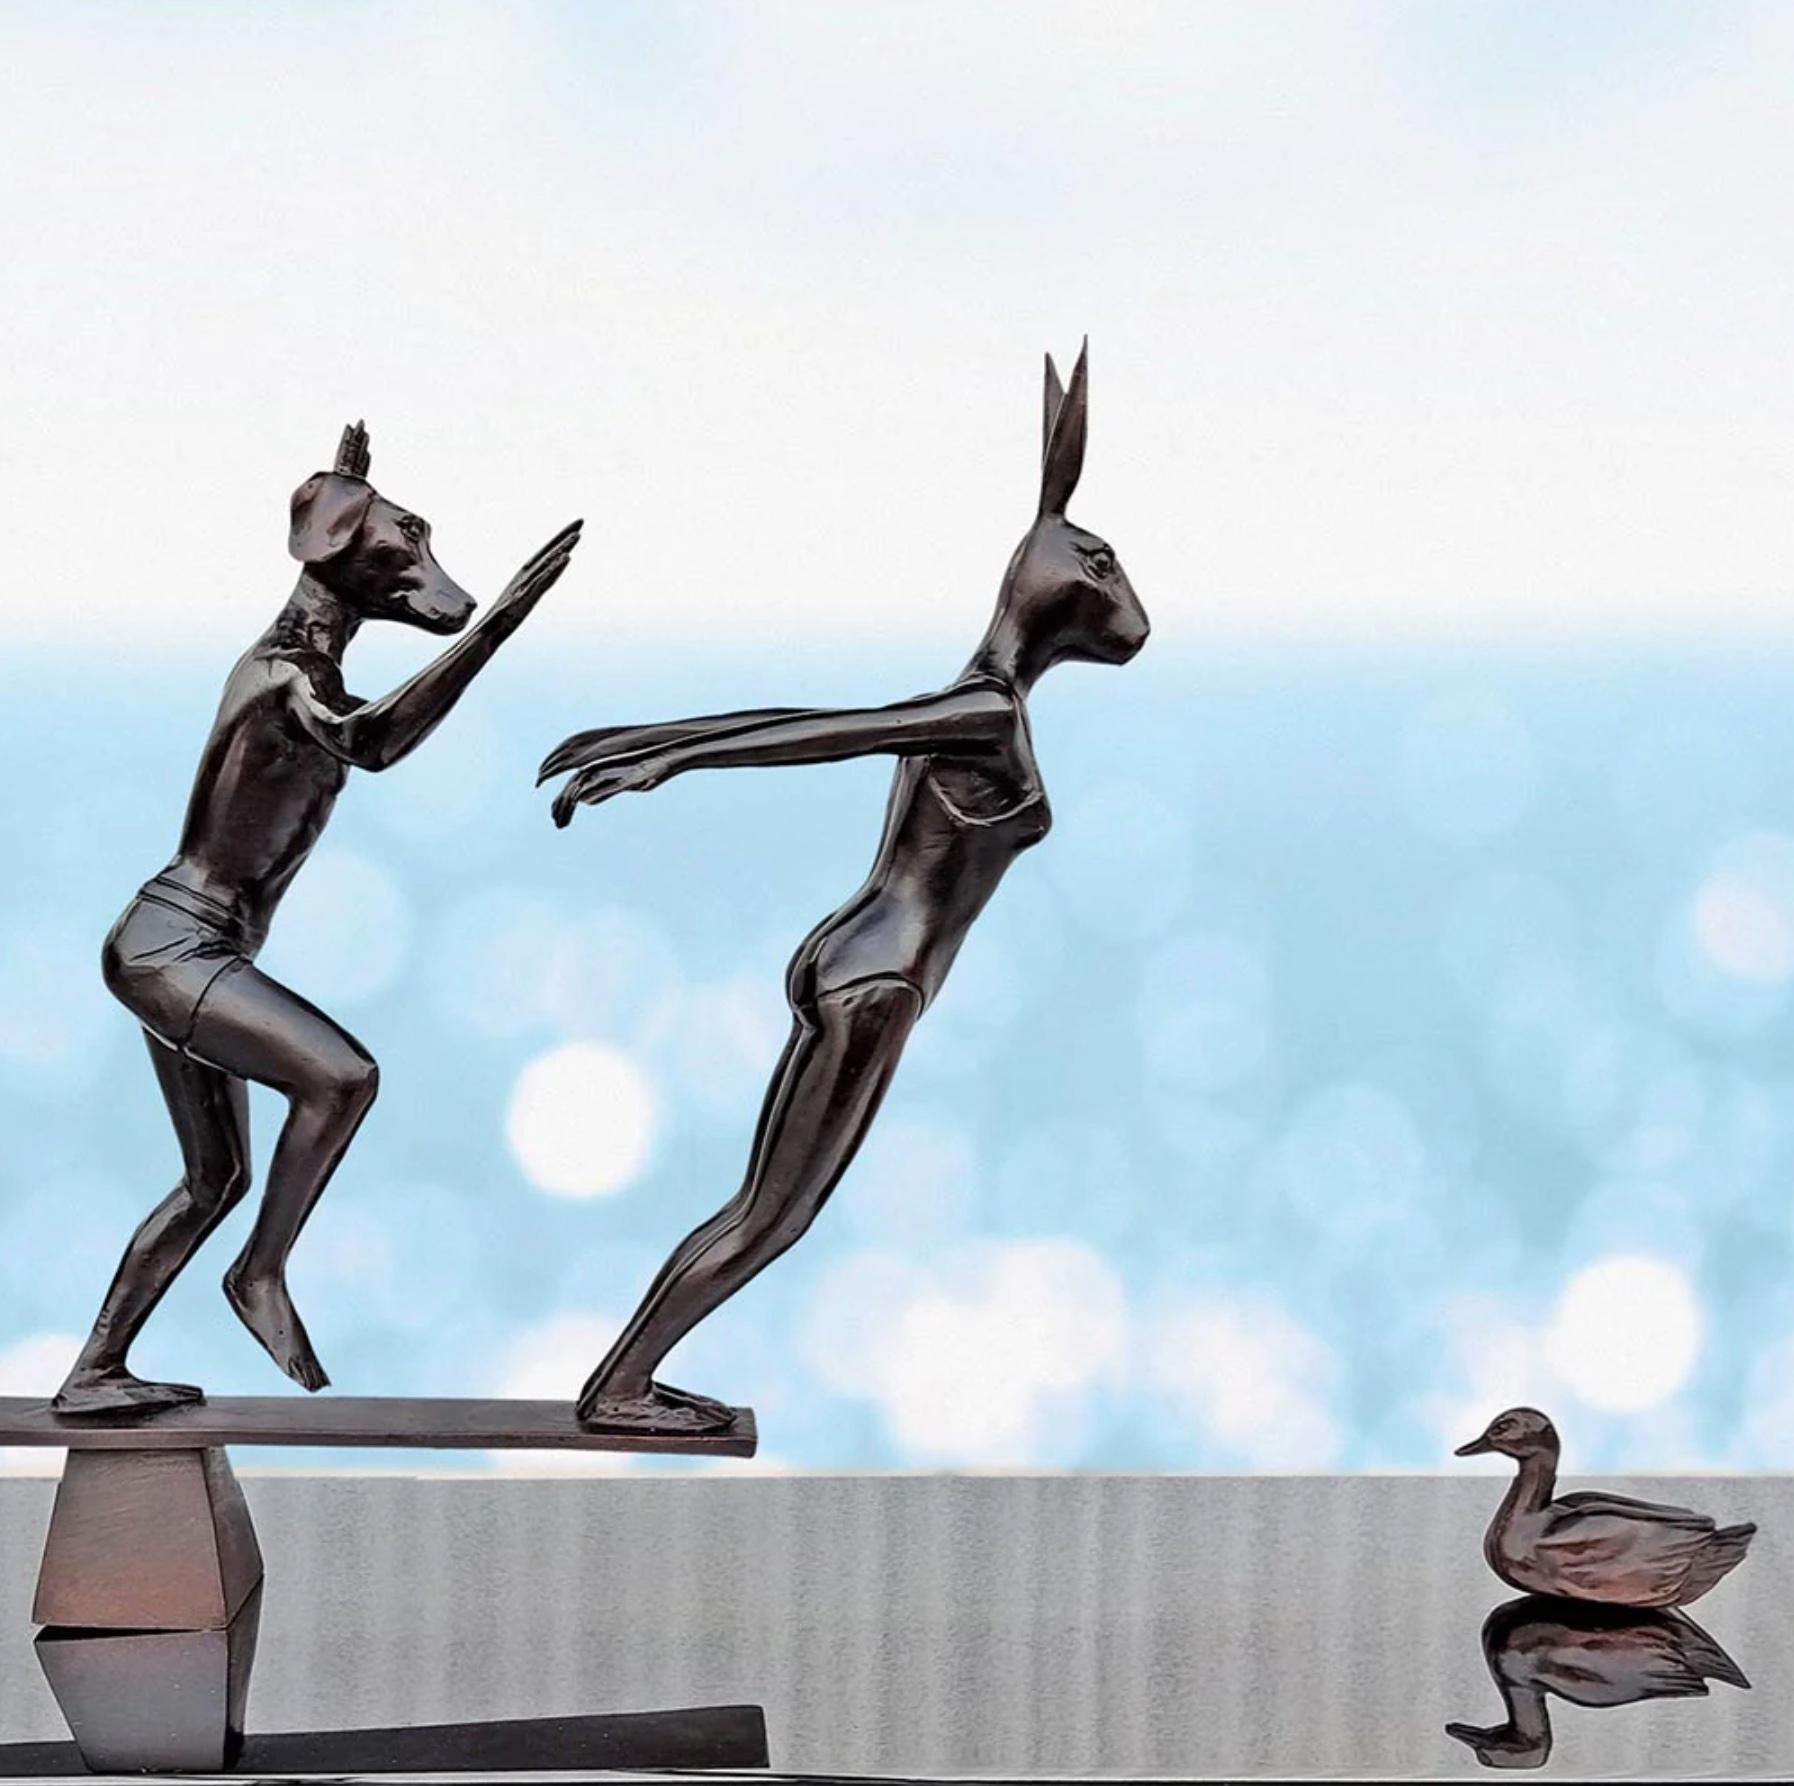 Title: They dived into life
Authentic Small Bronze Sculpture 

This authentic bronze sculpture titled 'They dived into life' by artists Gillie and Marc has been meticulously crafted in bronze. This sculpture features dogman and rabbitwoman diving